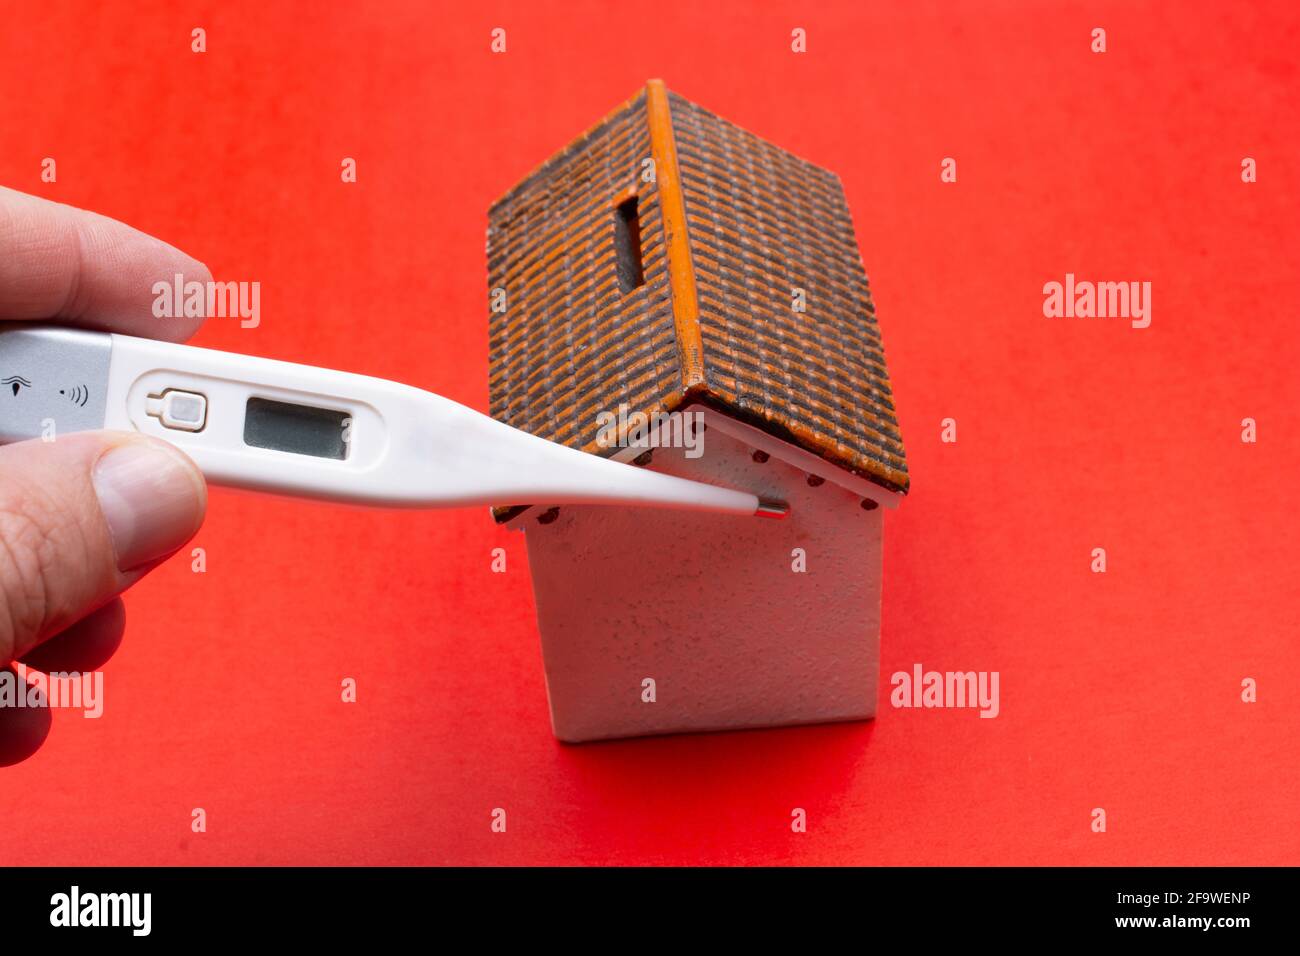 Thermometer Hisa, House Design